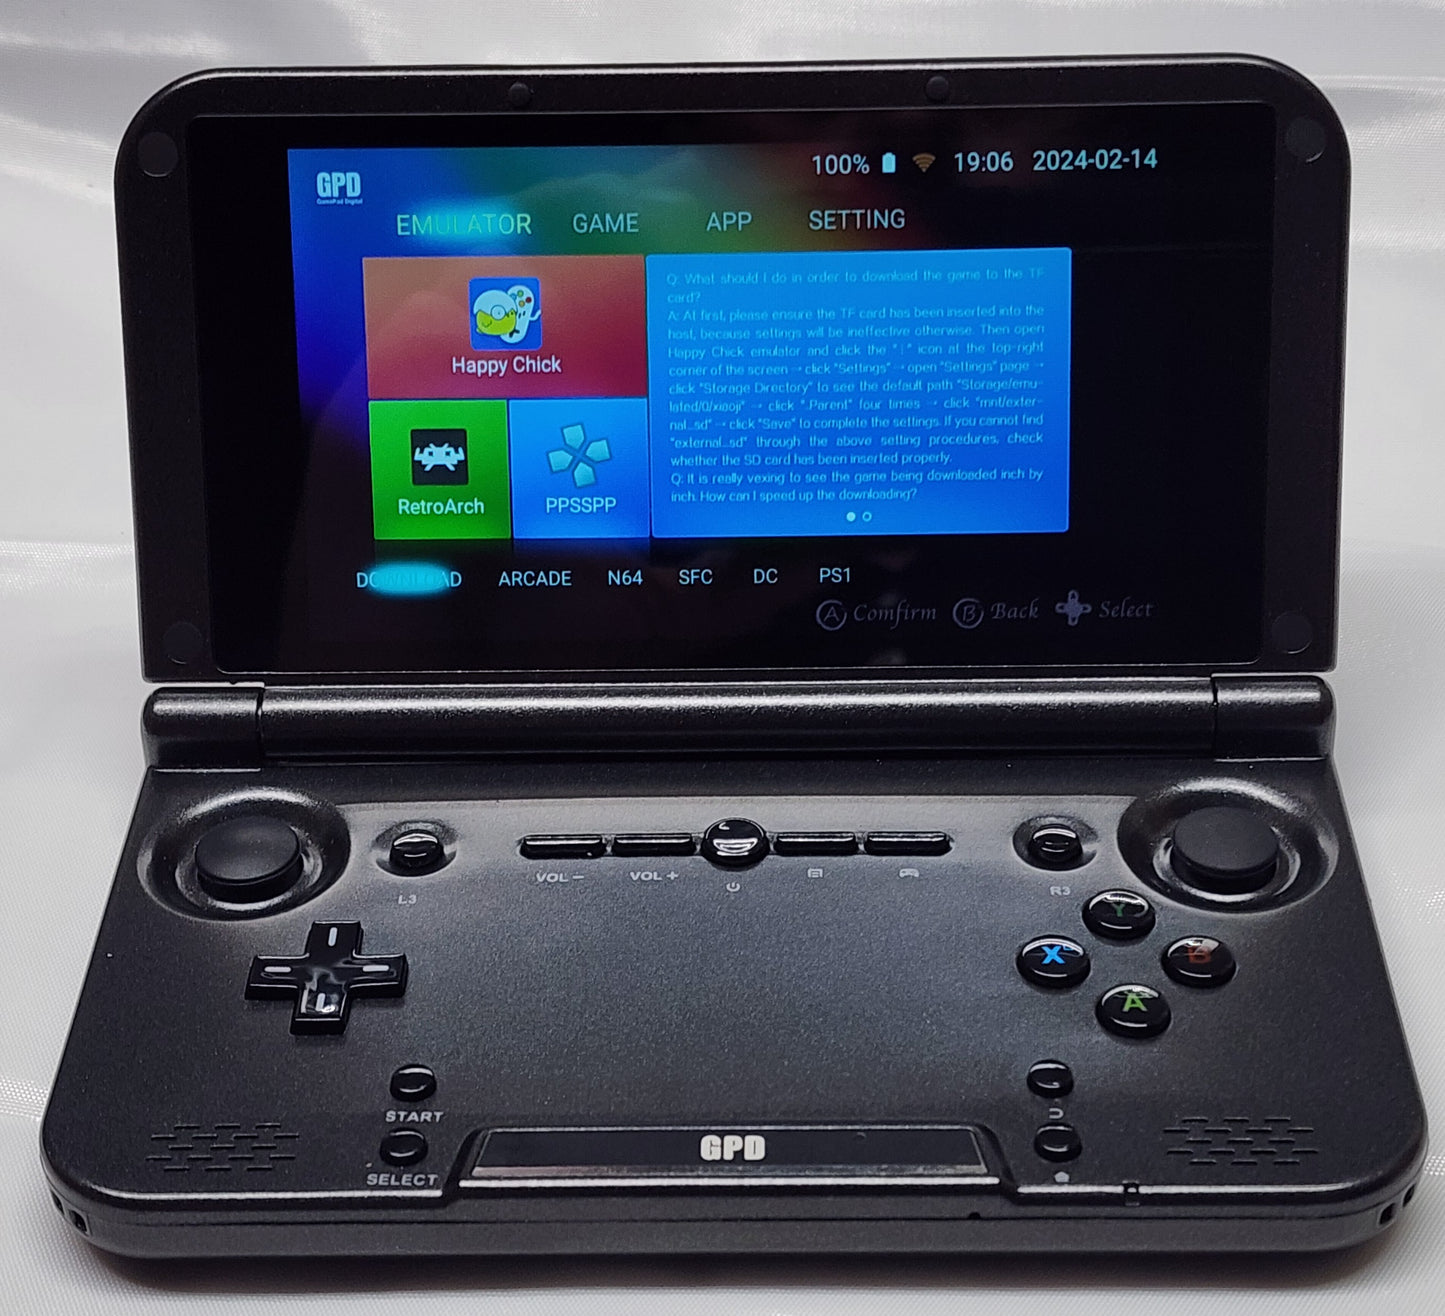 GPD XD Plus Handheld Gaming Console 5" Touchscreen. Used